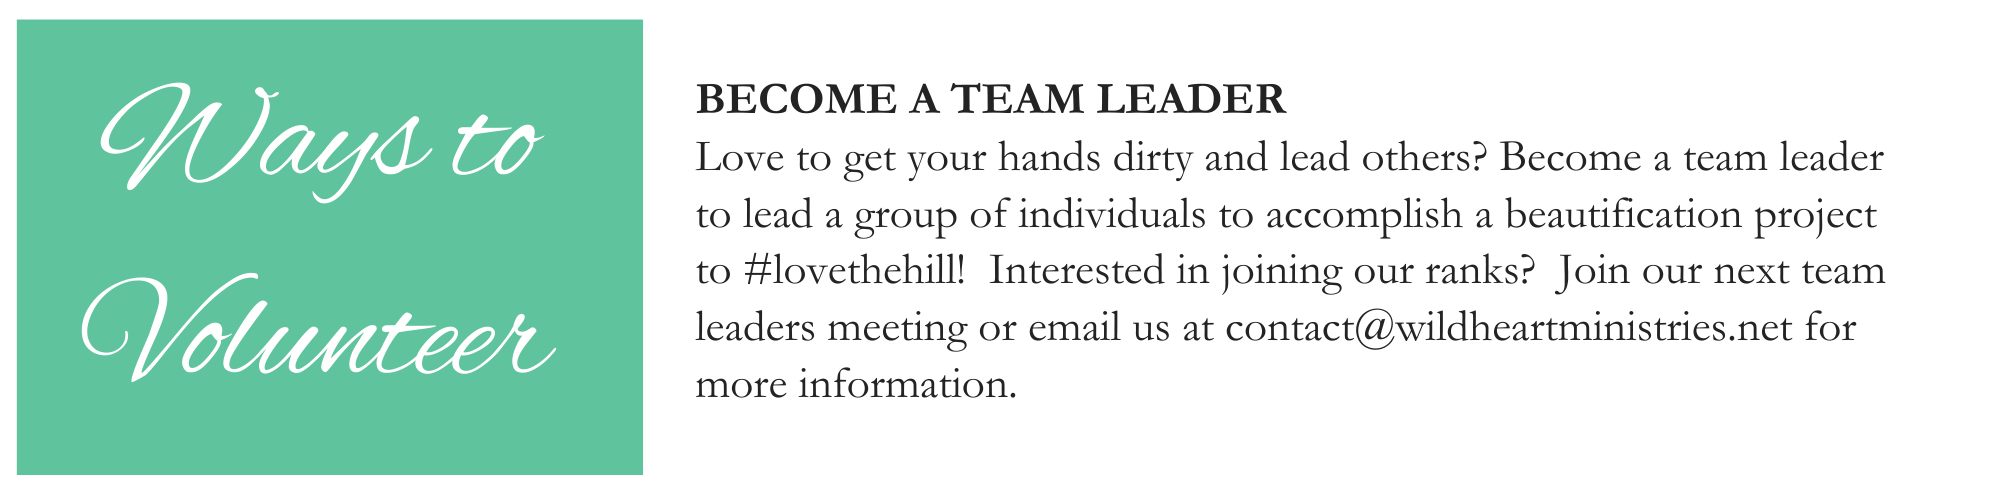 Become A Team Leader